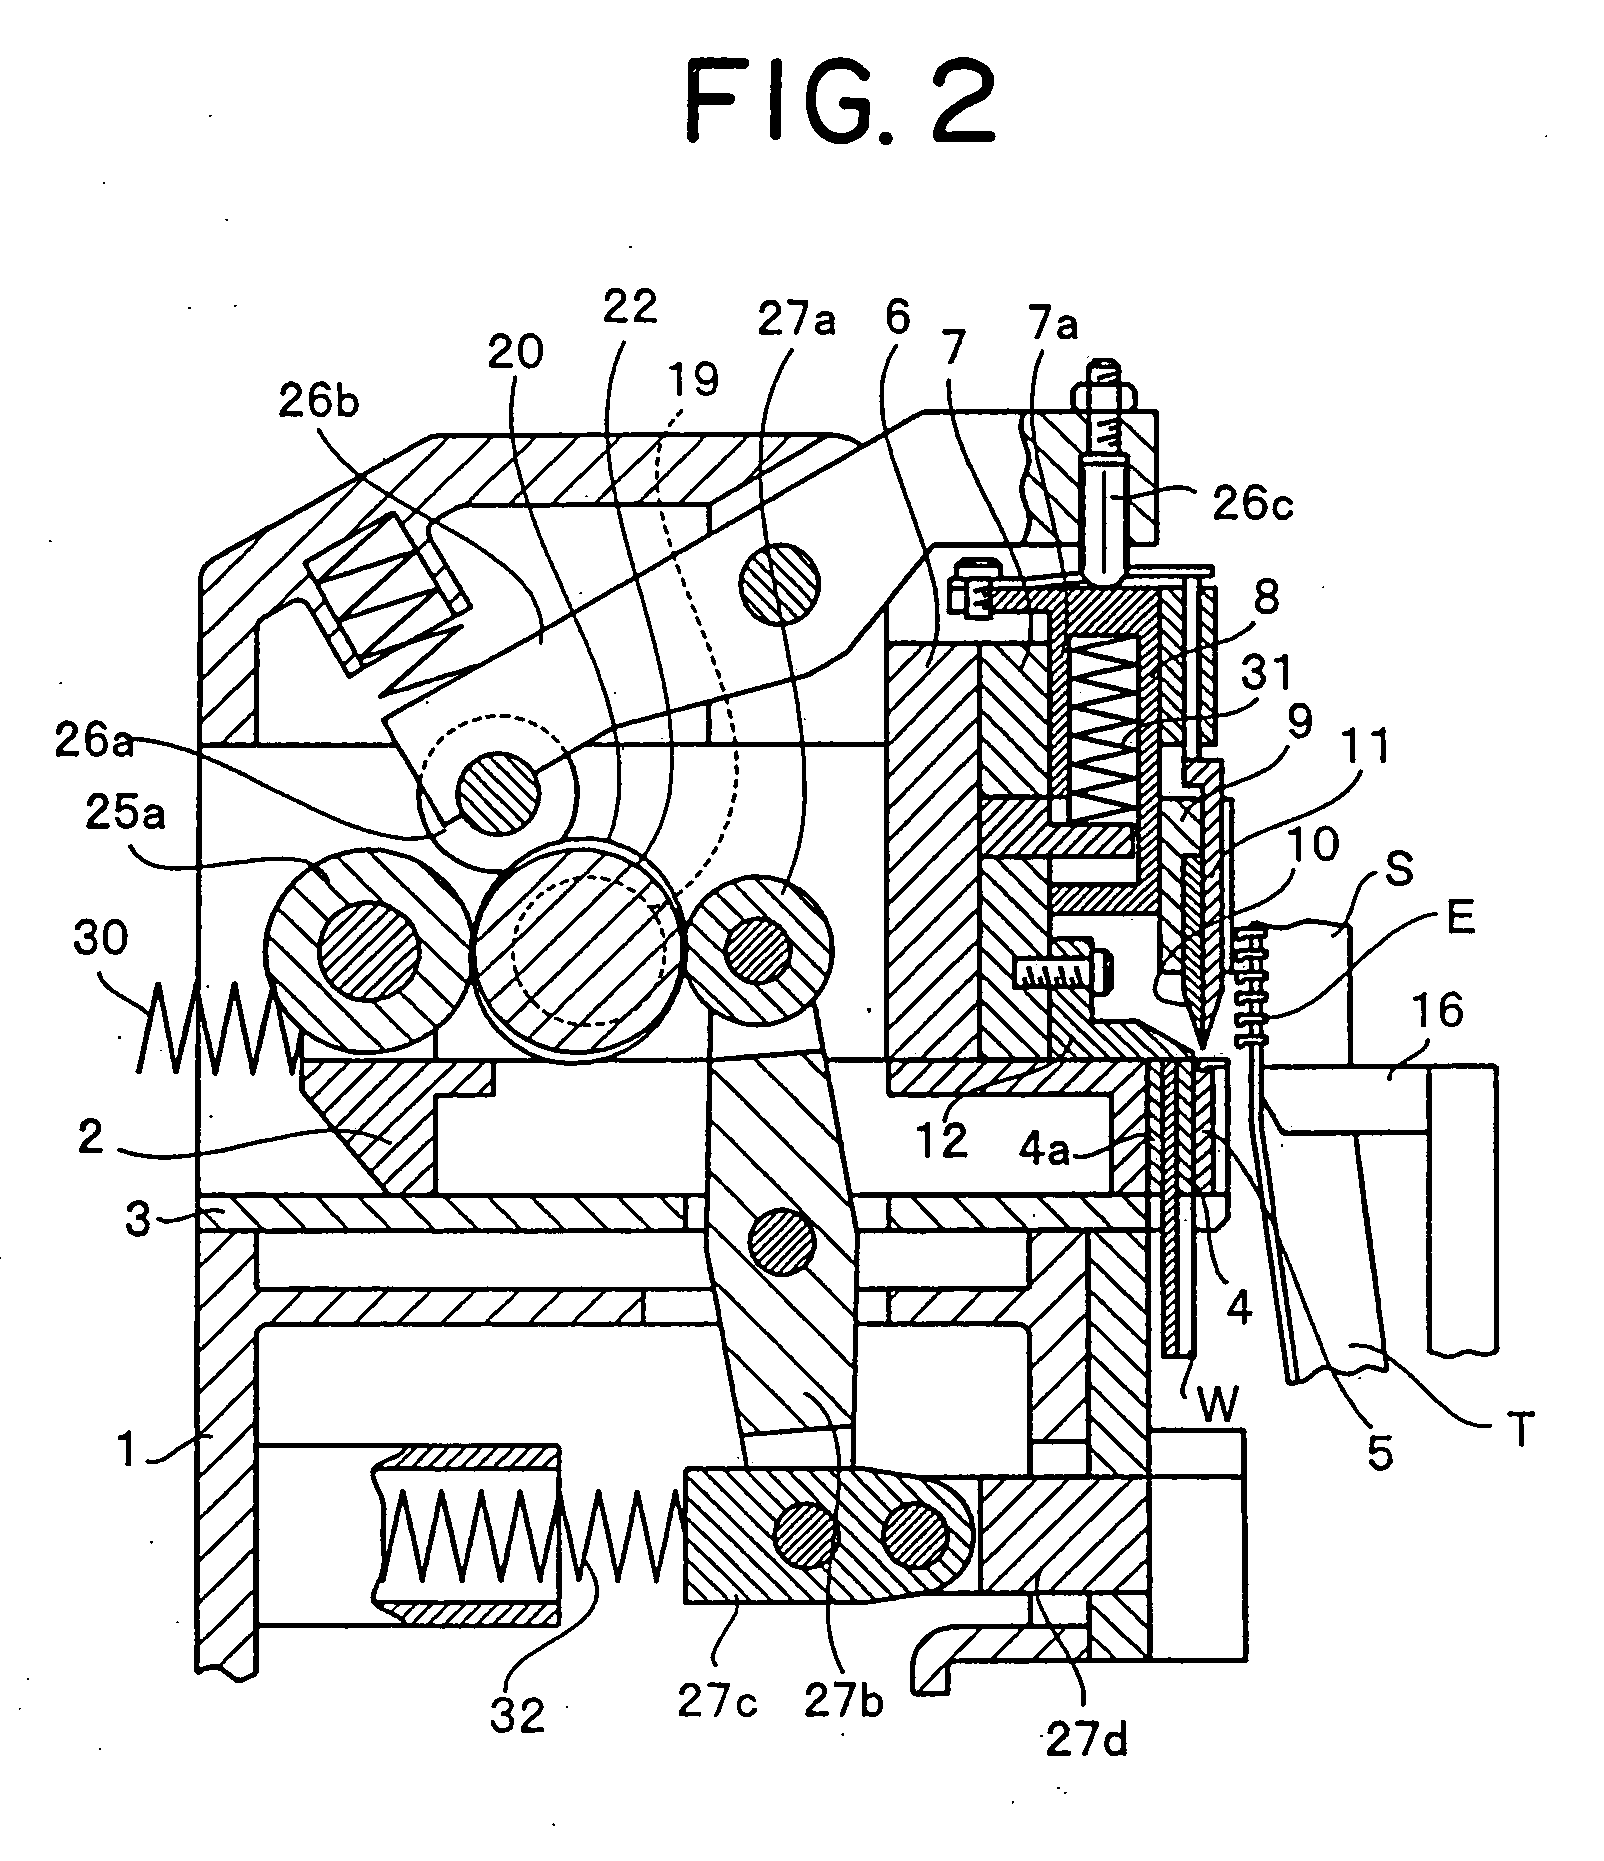 Feeding unit for engaging element metallic linear material in continuous manufacturing apparatus for fastener stringer